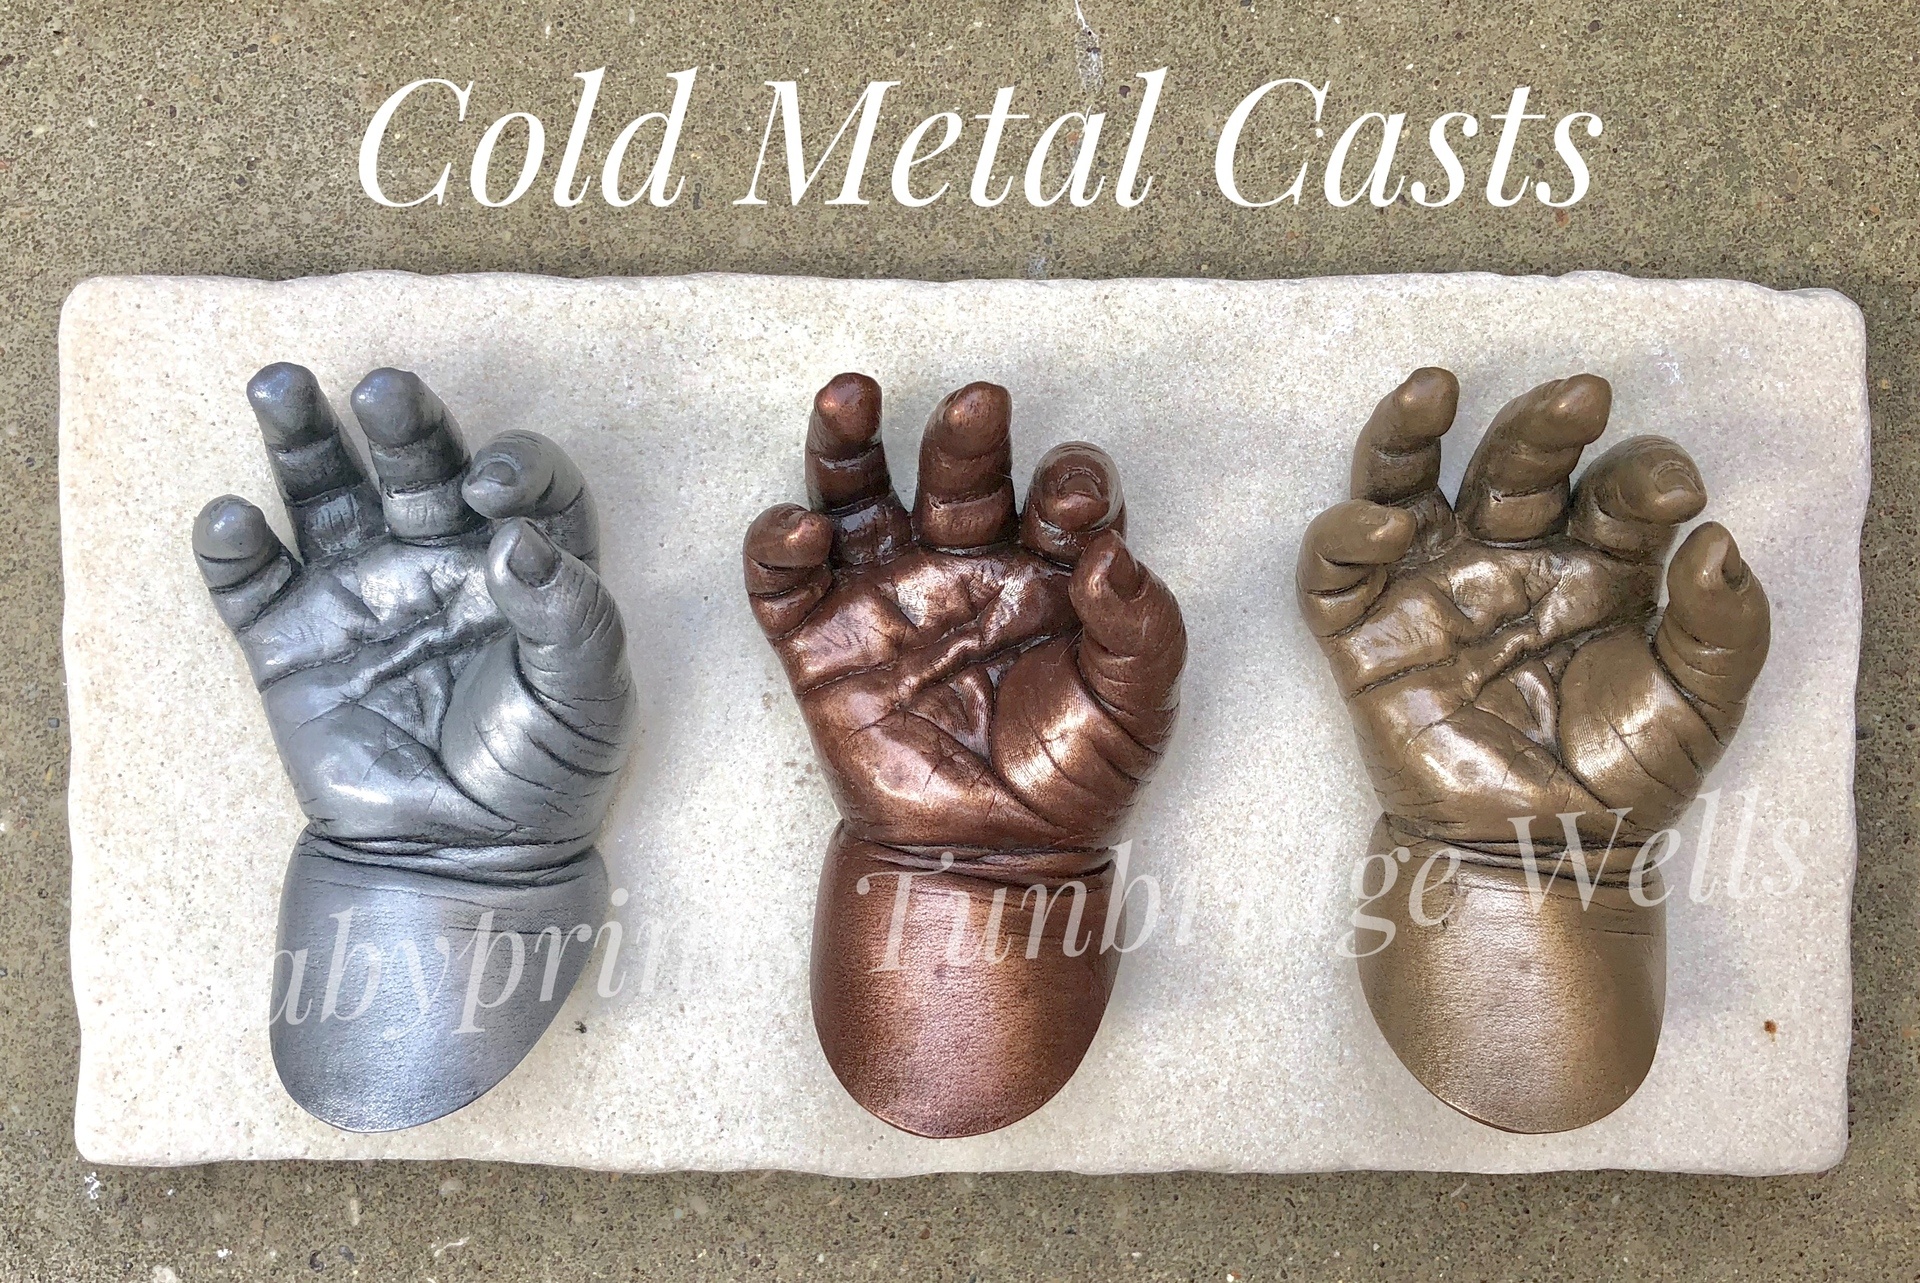 Cold Metal hand casts